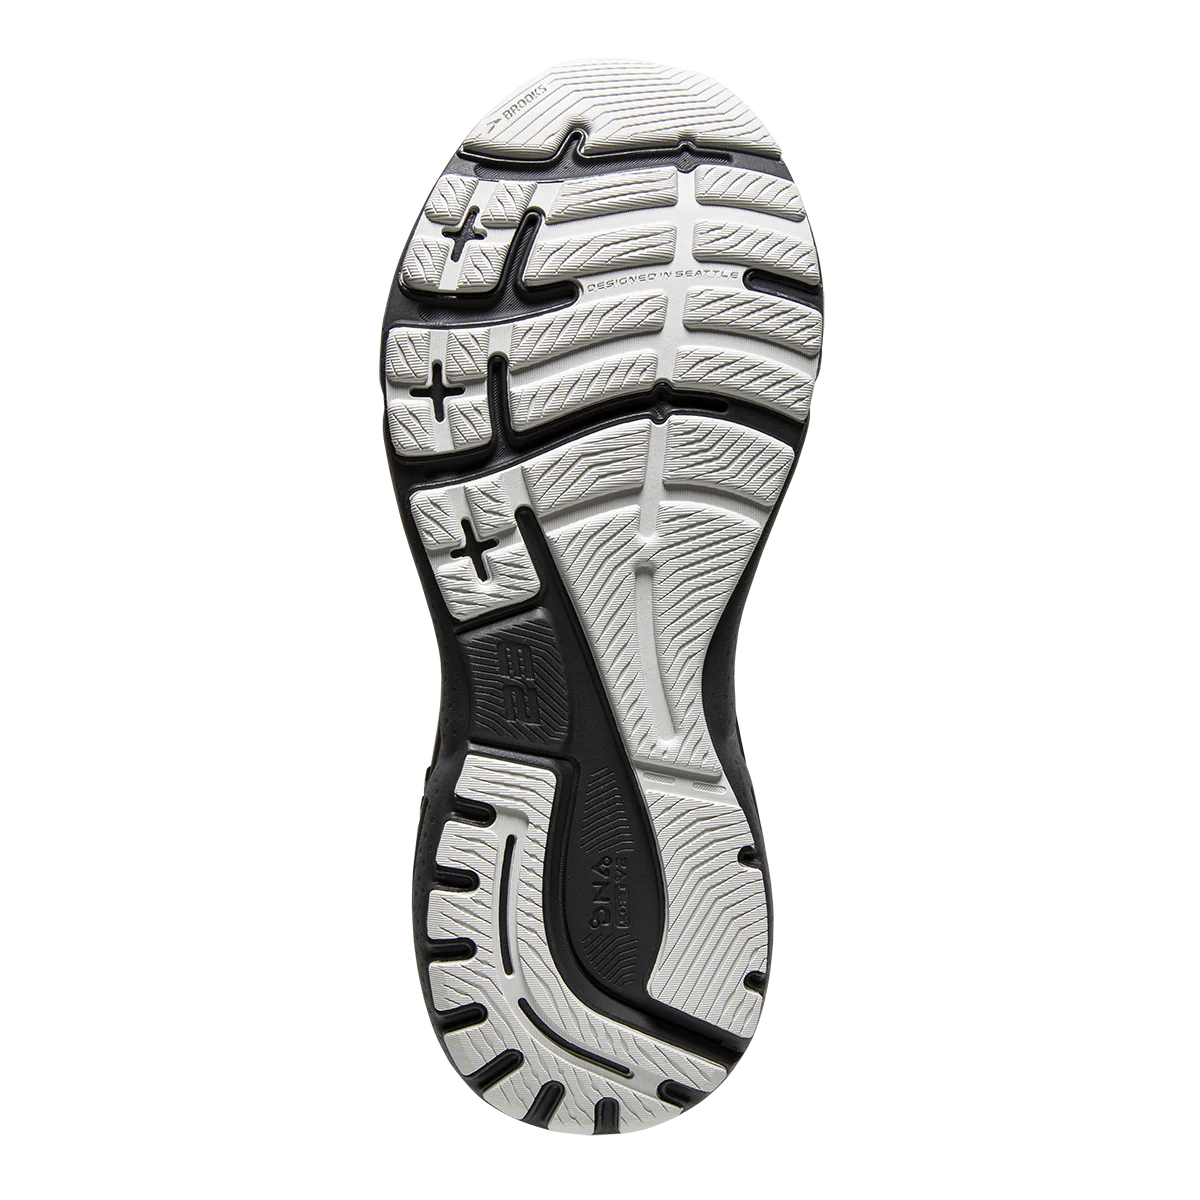 Bottom (outer sole) view of the Men's Adrenaline GTS by Brooks in the wide 2E width, color Black/Black/Ebony